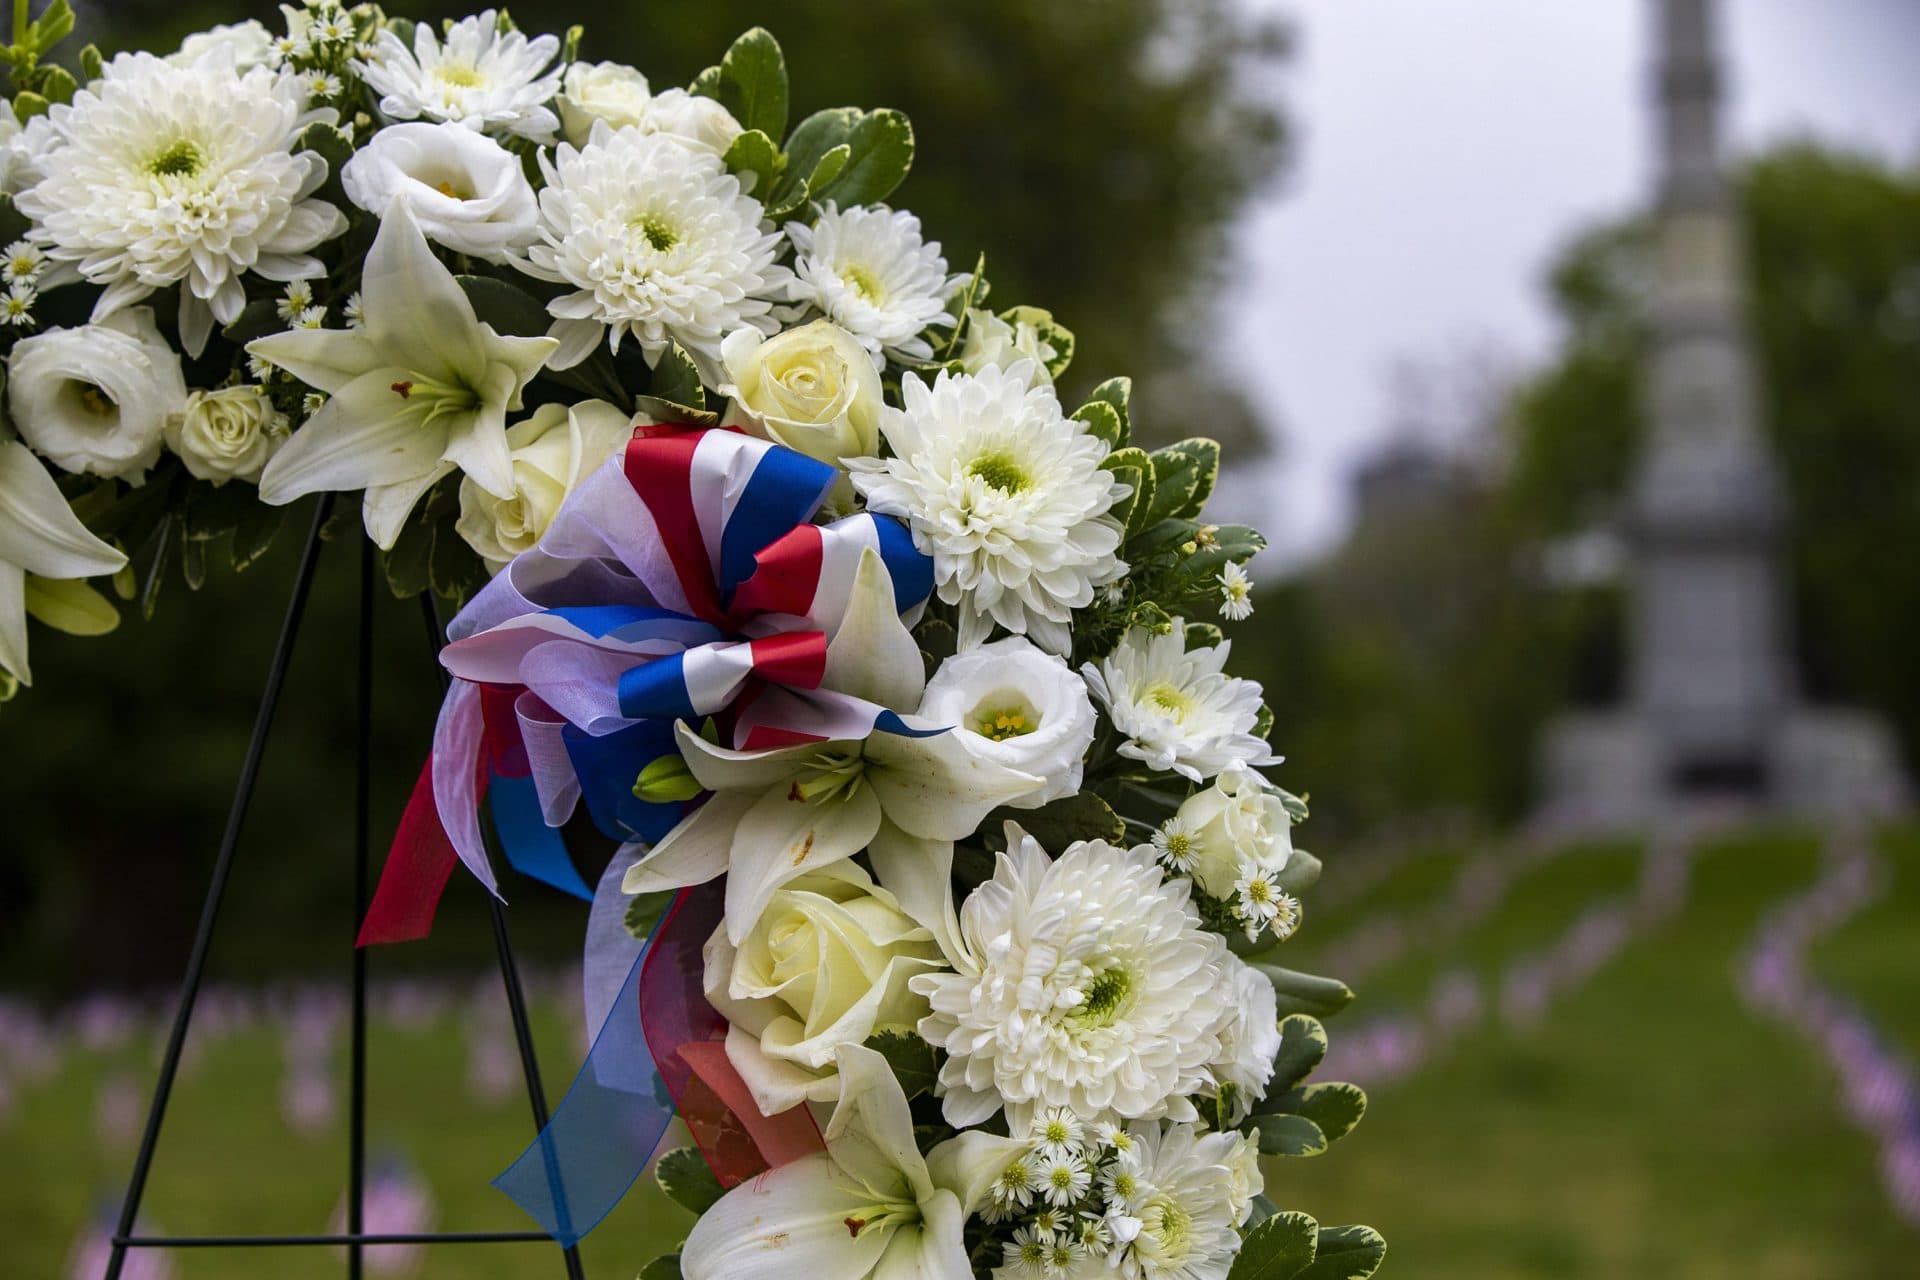 A wreath is placed during the early morning Memorial Day ceremony in the Boston Common. (Jesse Costa/WBUR)